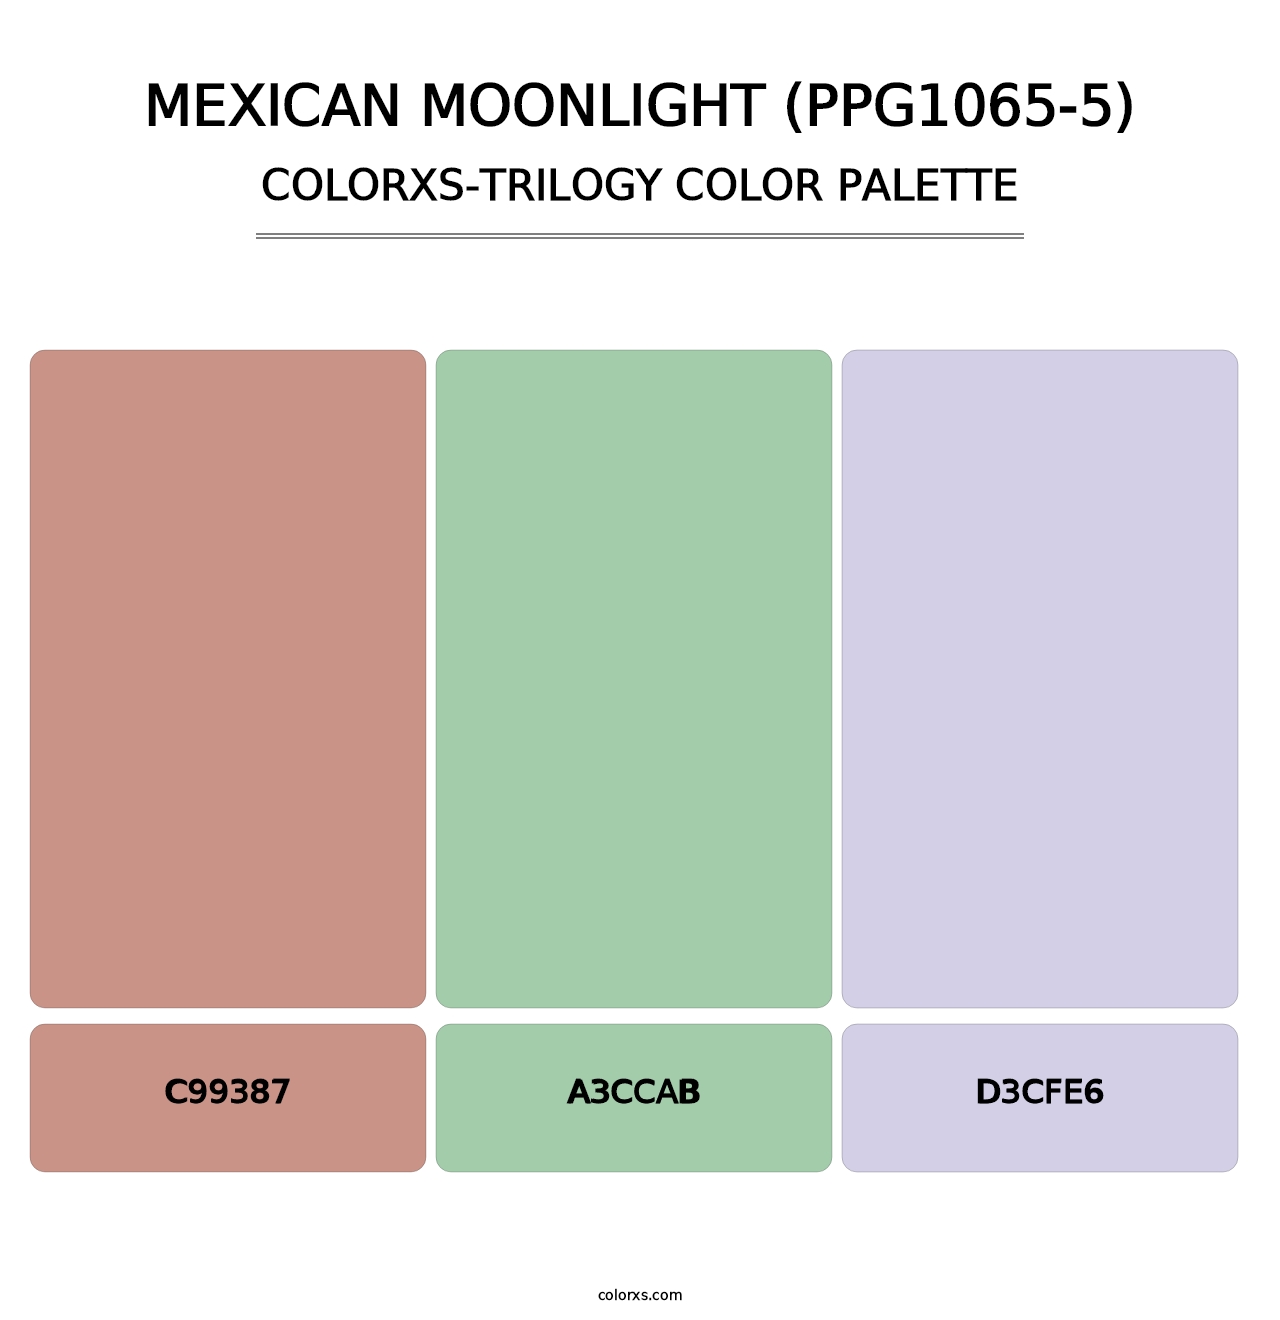 Mexican Moonlight (PPG1065-5) - Colorxs Trilogy Palette